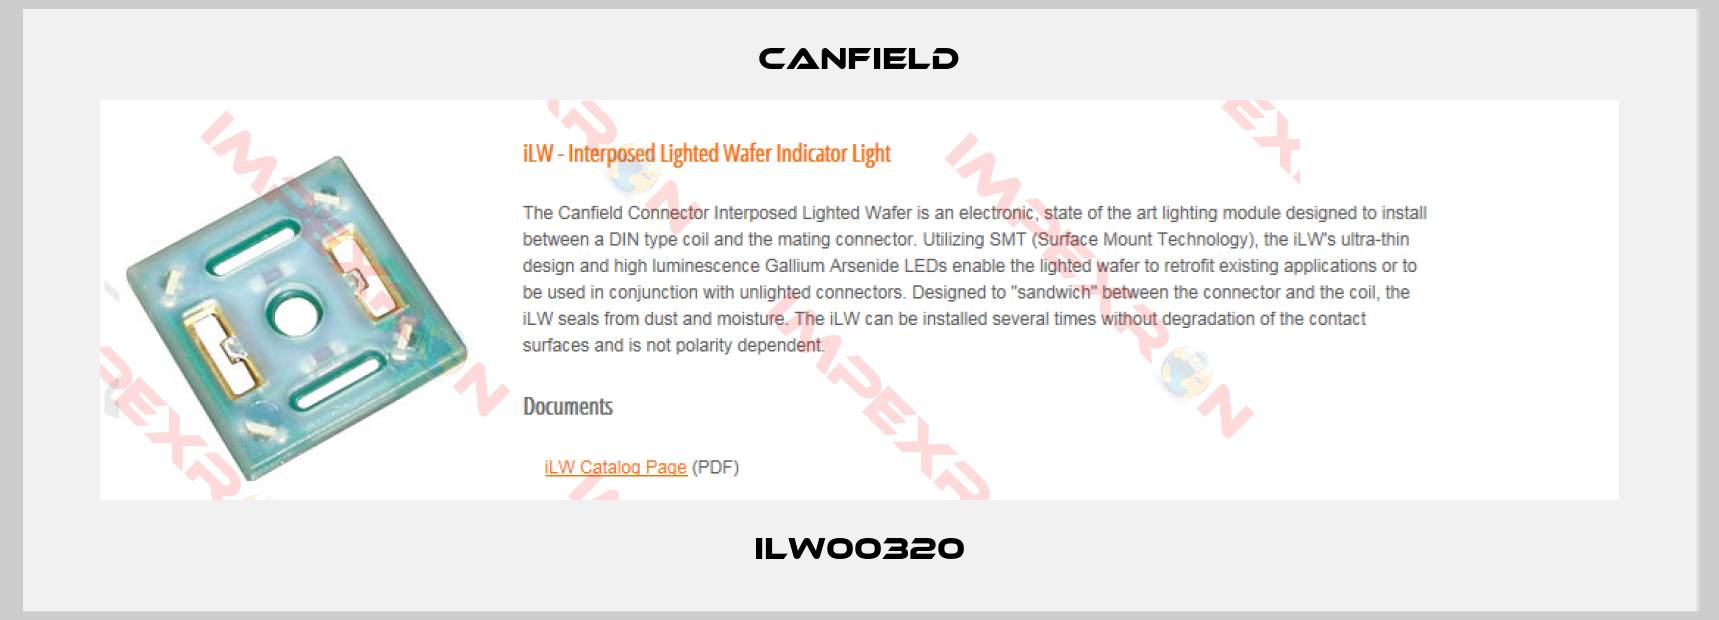 Canfield Connector-ILW00320